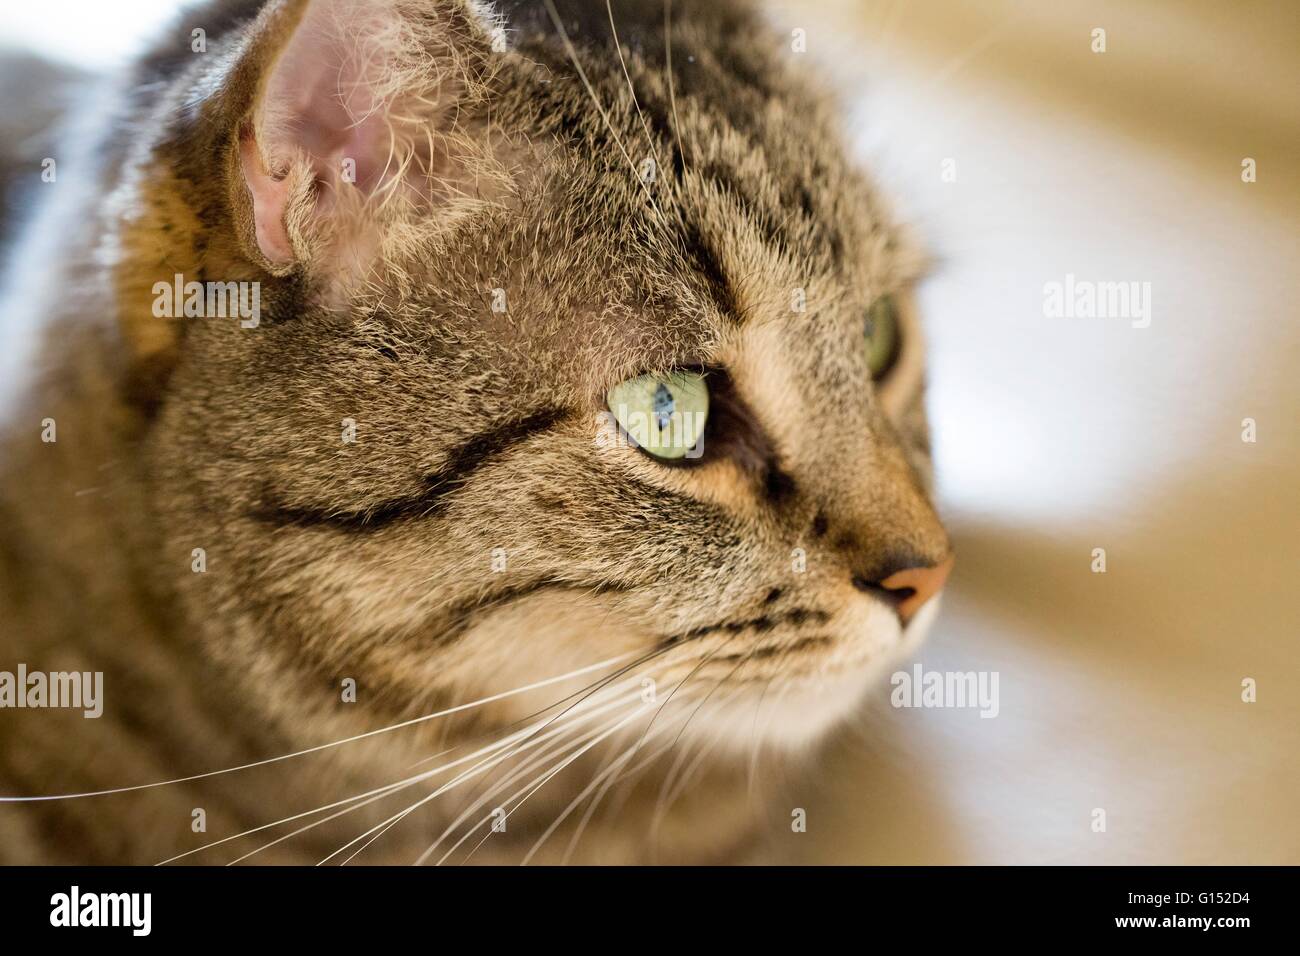 Profil close-up of tabby cat with green eyes Stock Photo